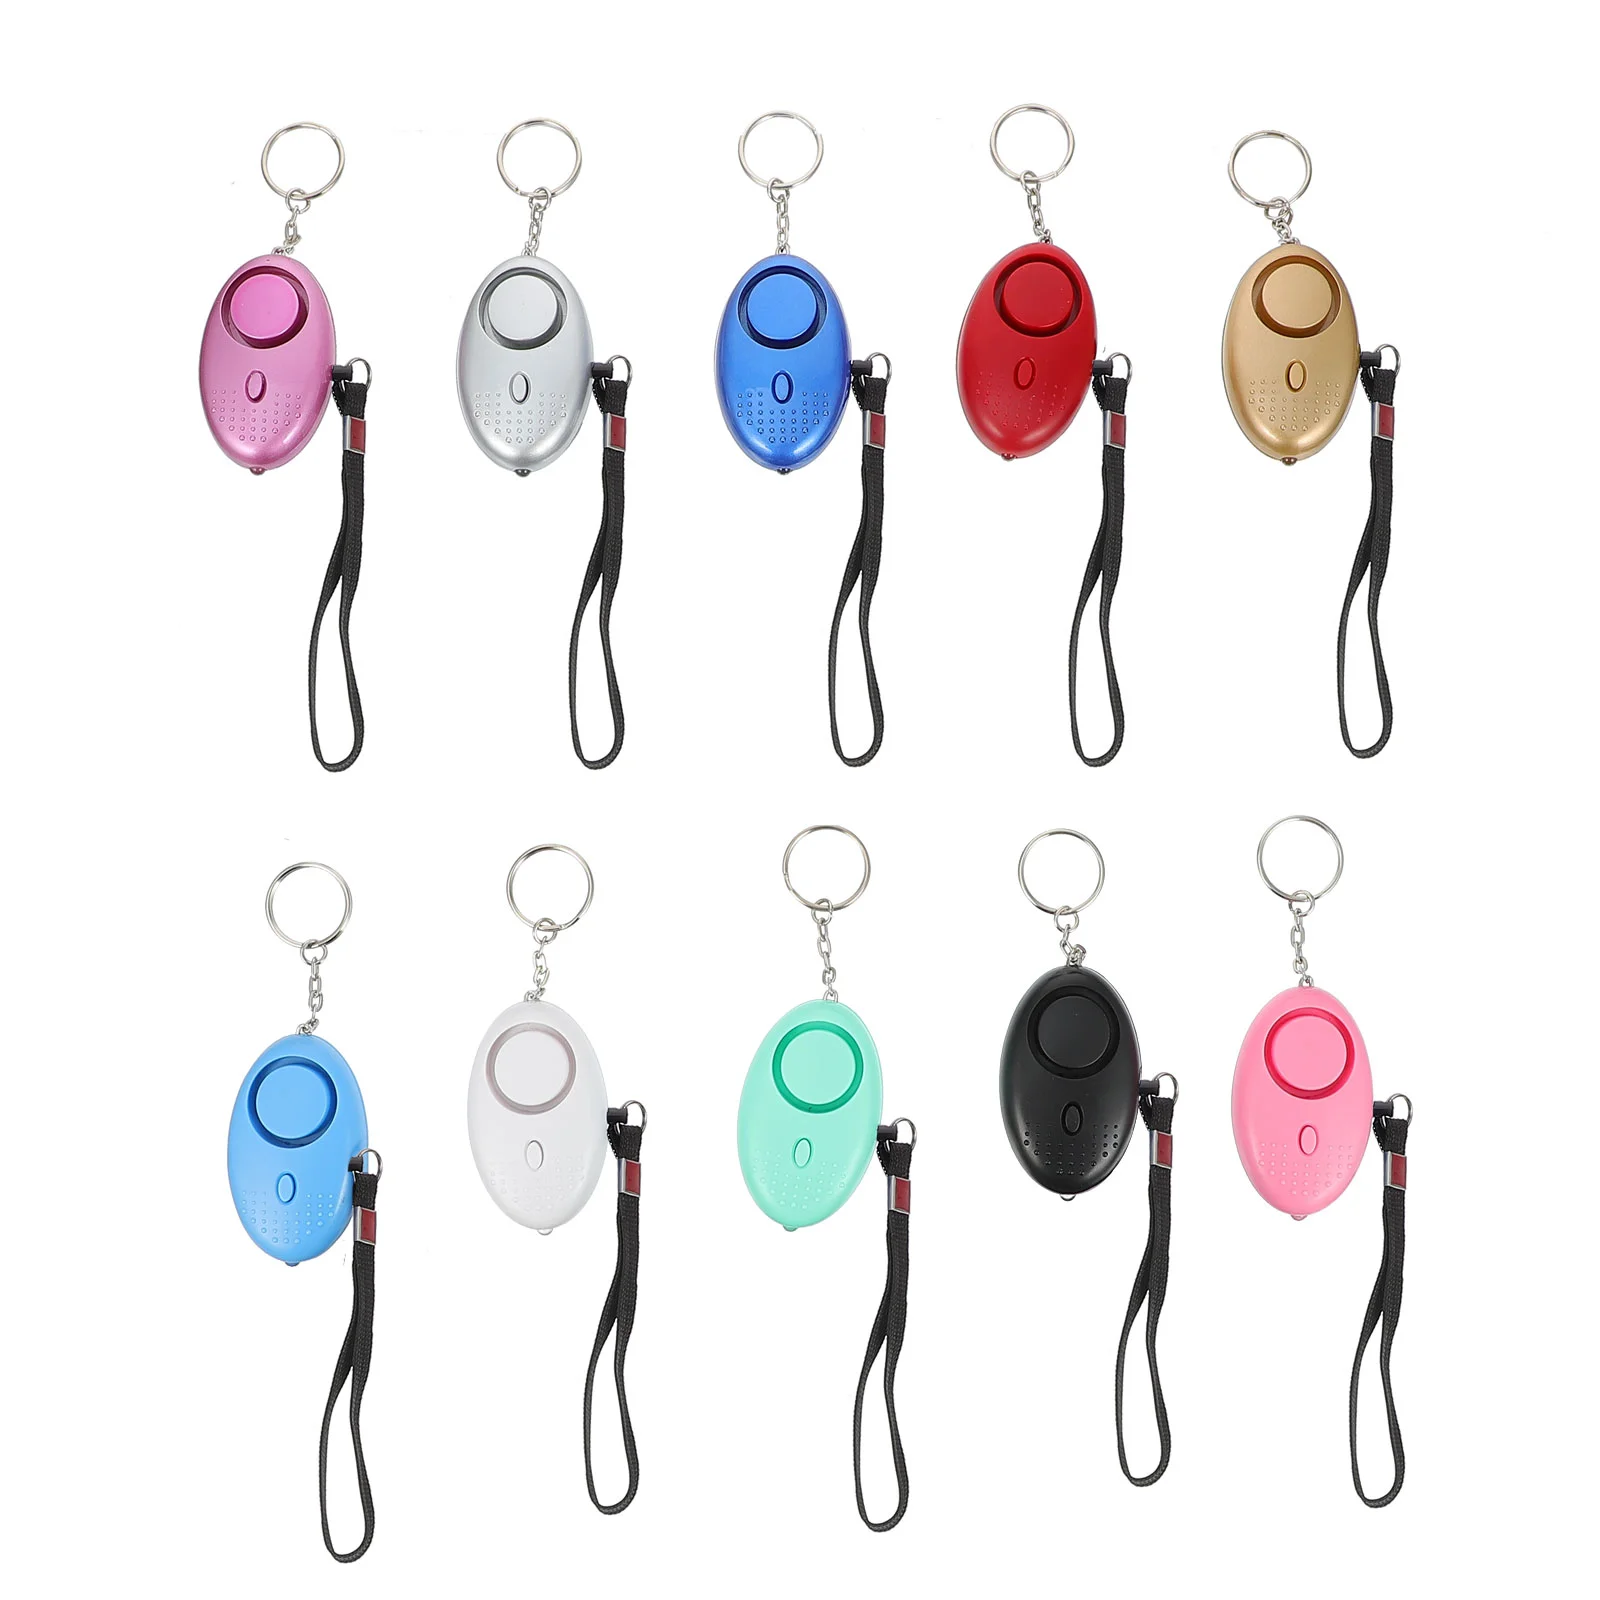 

10 Pcs Security Alarm Safety Siren Women Emergency Woman Sound Personal Abs Keychain